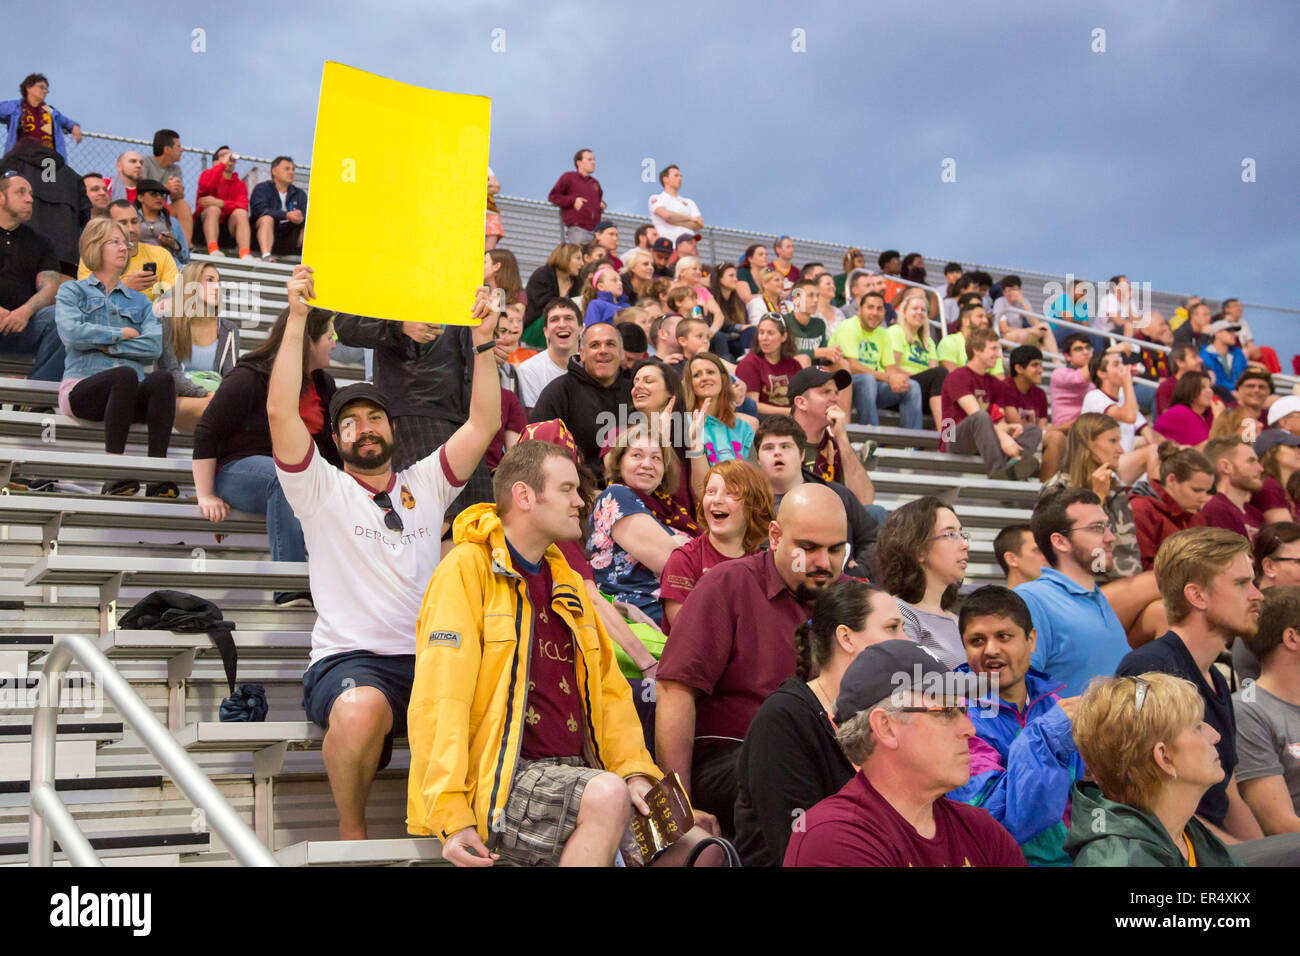 Detroit, Michigan - A soccer fan appeals for a yellow card during a match between Detroit City FC and Muskegon Risers. Stock Photo